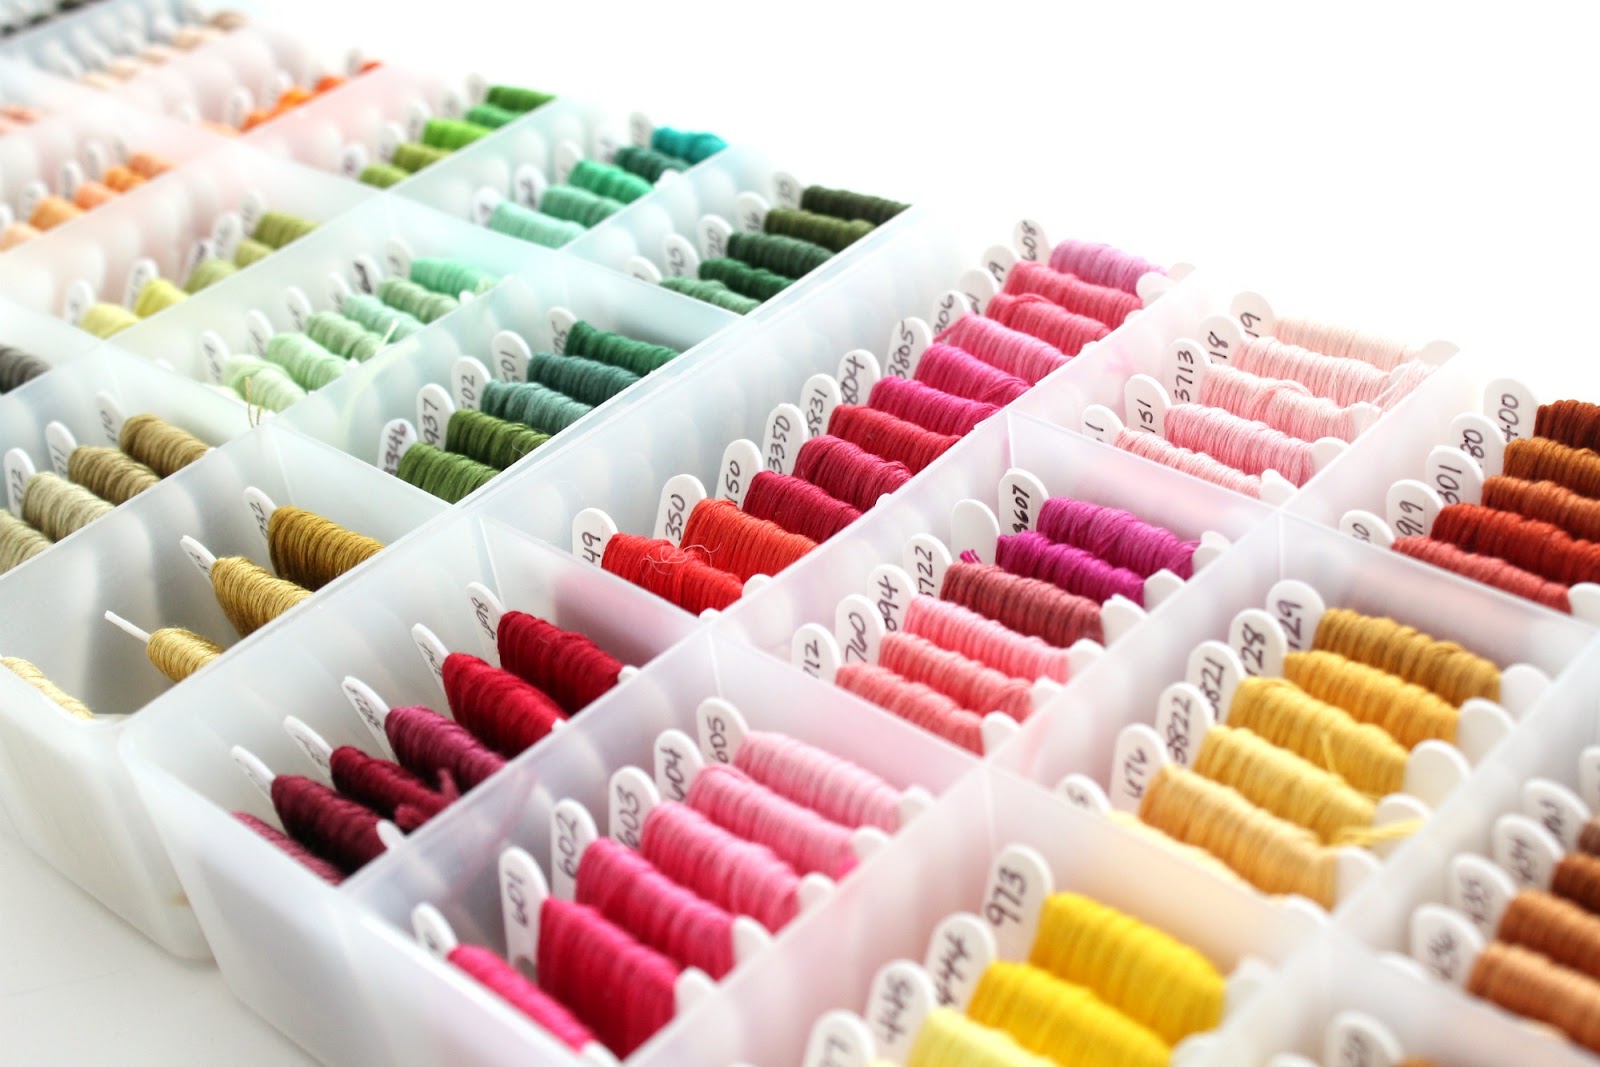 Embroidery Storage For Threads, Floss & More